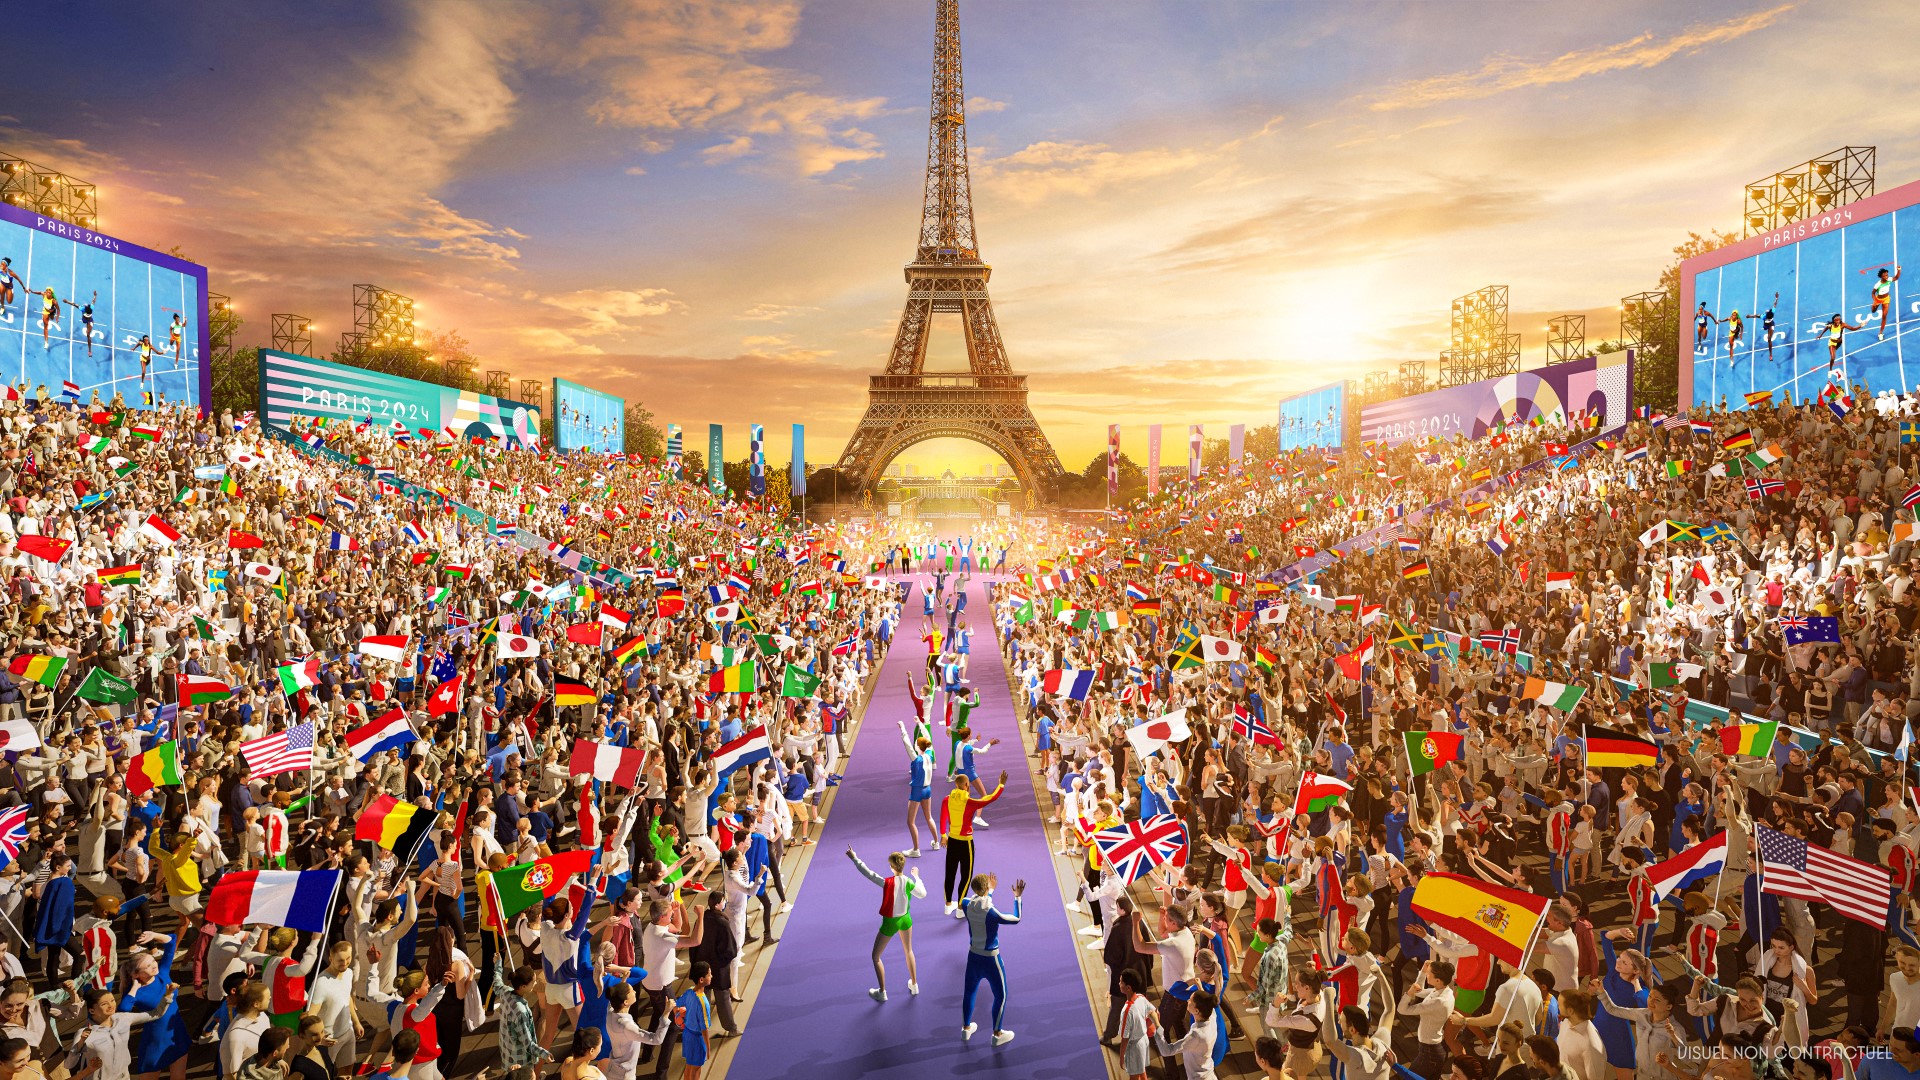 For the first time in the history of the Summer Games, medal-winners will be invited to mingle with fans, in the Champions Park set up in the Trocadéro. Photo: Paris 2024/Florian Hulleu